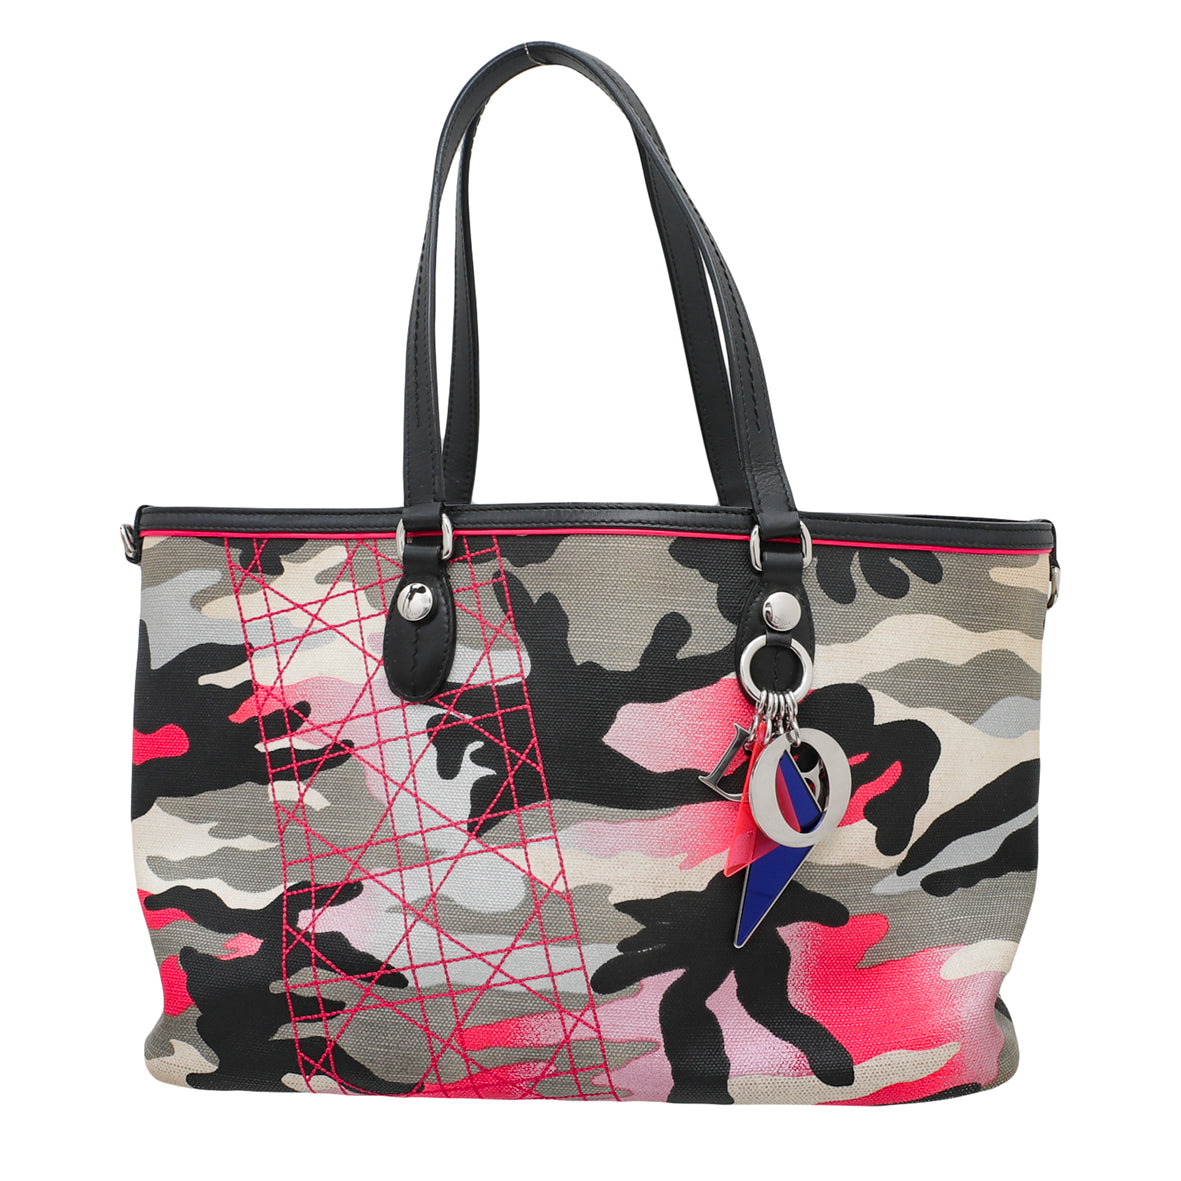 Christian Dior Pink Multicolor Camouflage Anselm Reyle Tote Bag